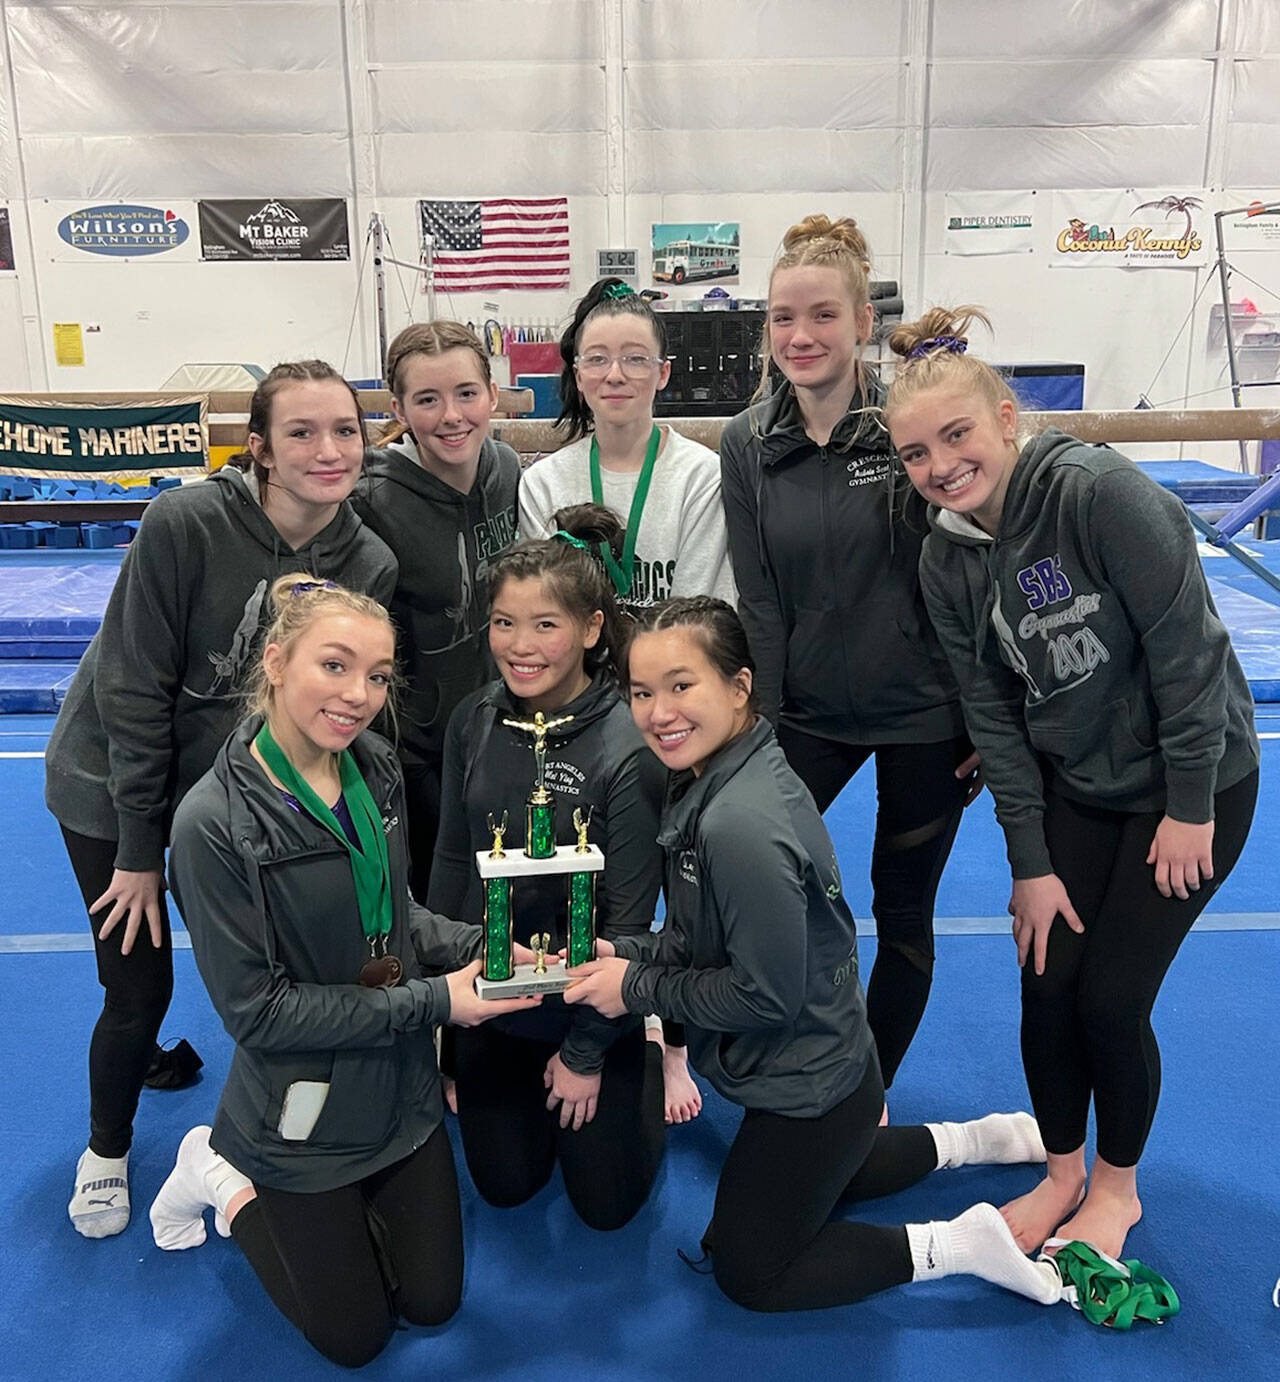 Photo courtesy of Jackie Mangano
The combined Sequim-Port Angeles-Crescent gymnastics team celebrates a second place finish at the Sehome Invitational in Ferndale on Jan. 8. Pictured are (back row, from left) Maddie Adams, Faith Carr, Jessamyn Schindler, Aubrie Scott and Alex Schmadeke, with (front row, from left) Susannah Sharp, Mei-Ying Harper-Smith and Yau Fu.